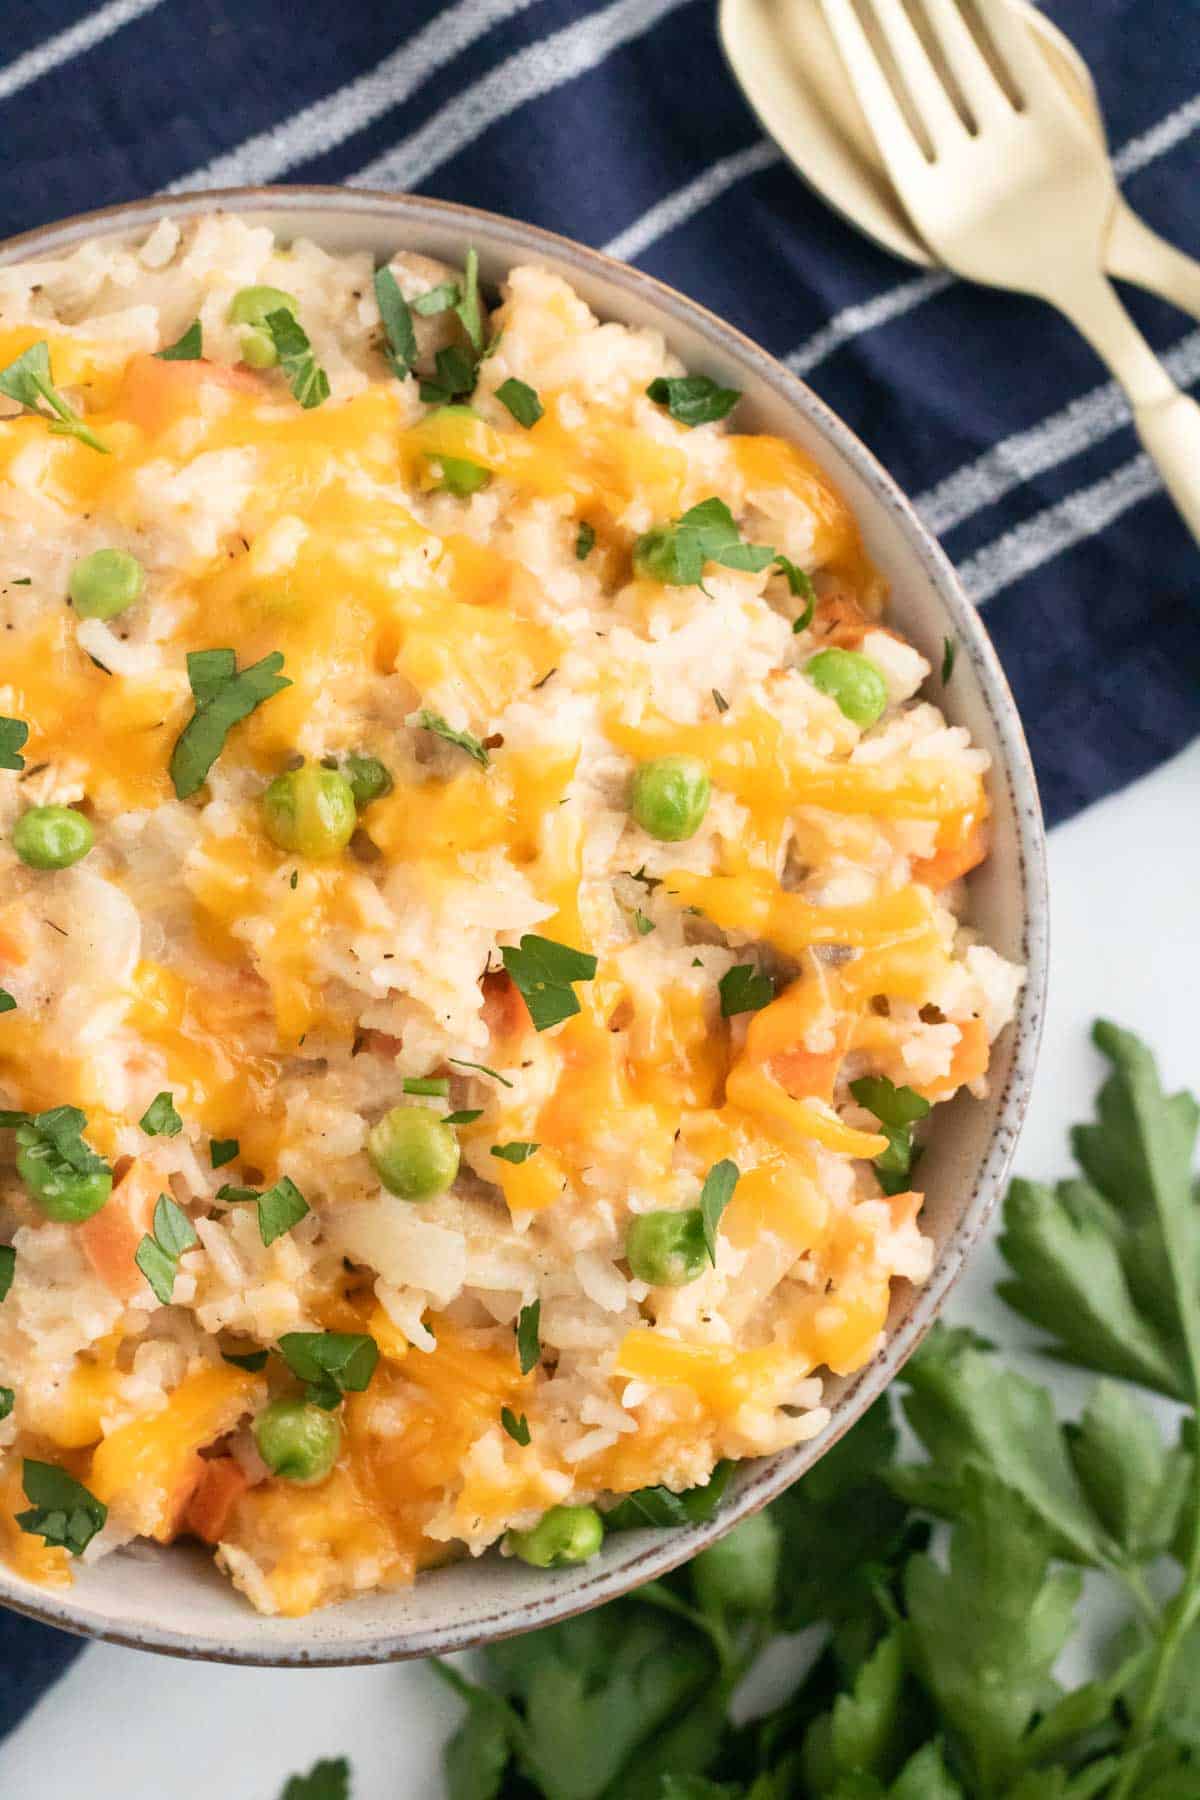 Chicken and rice casserole served in a bowl.